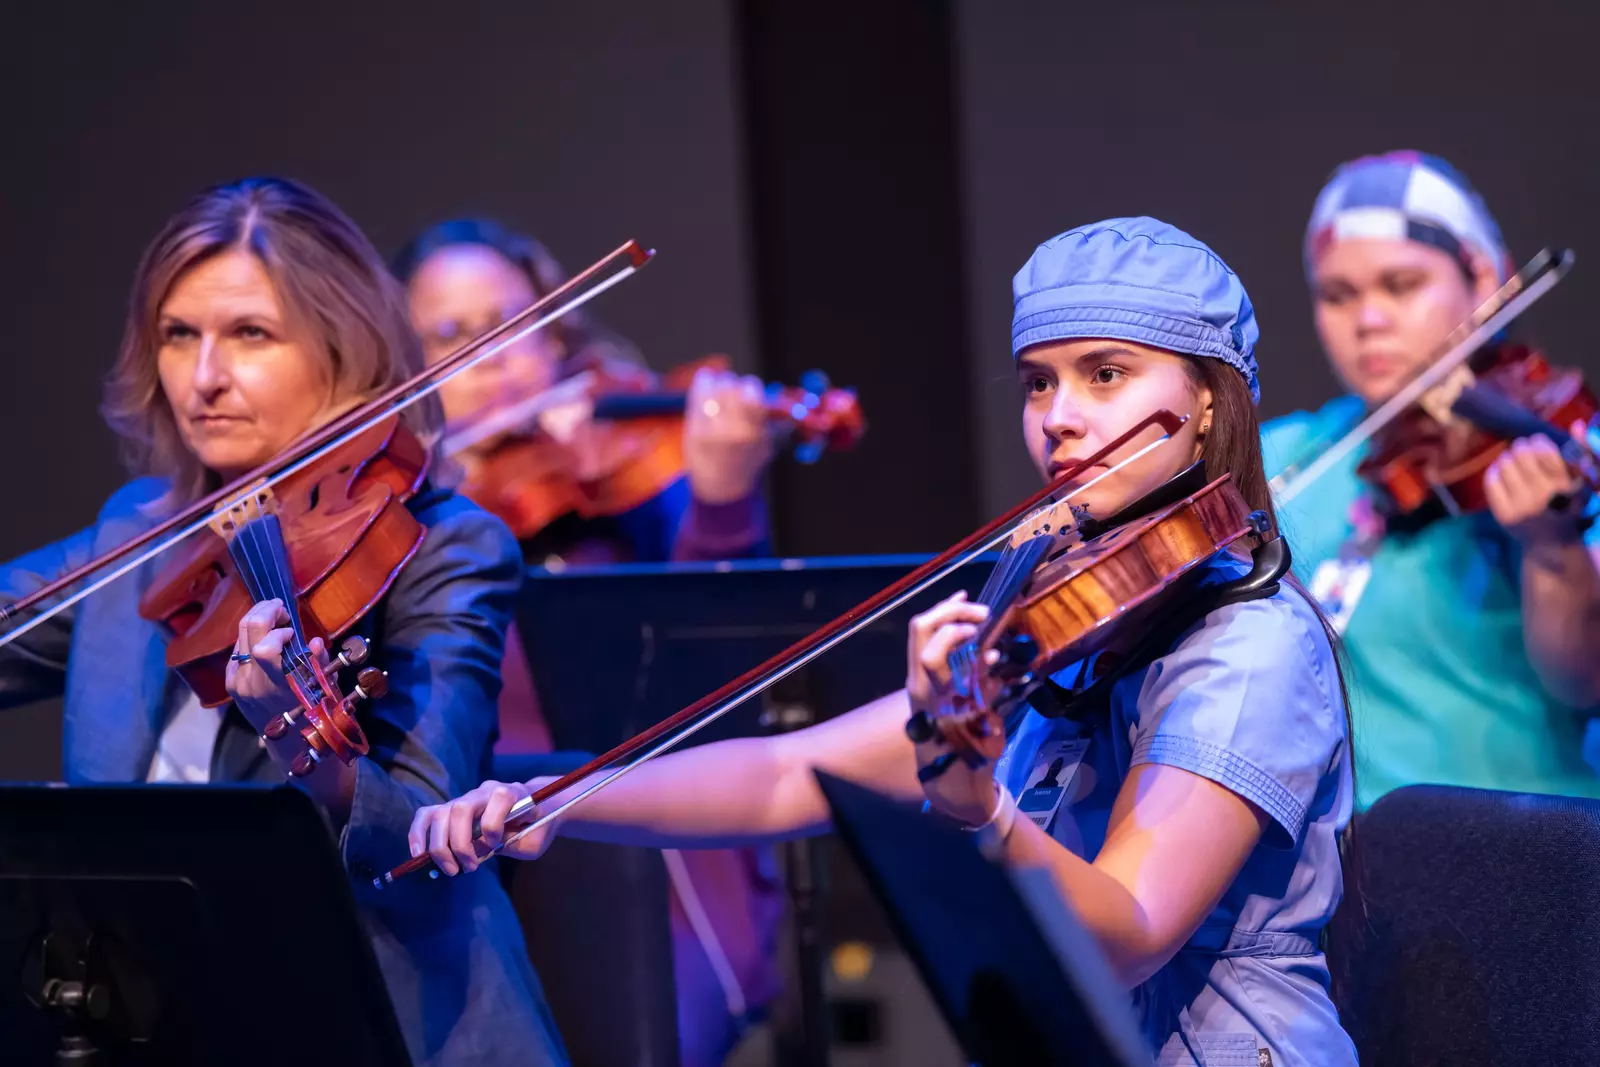 The AdventHealth employee orchestra performs a requiem performance.